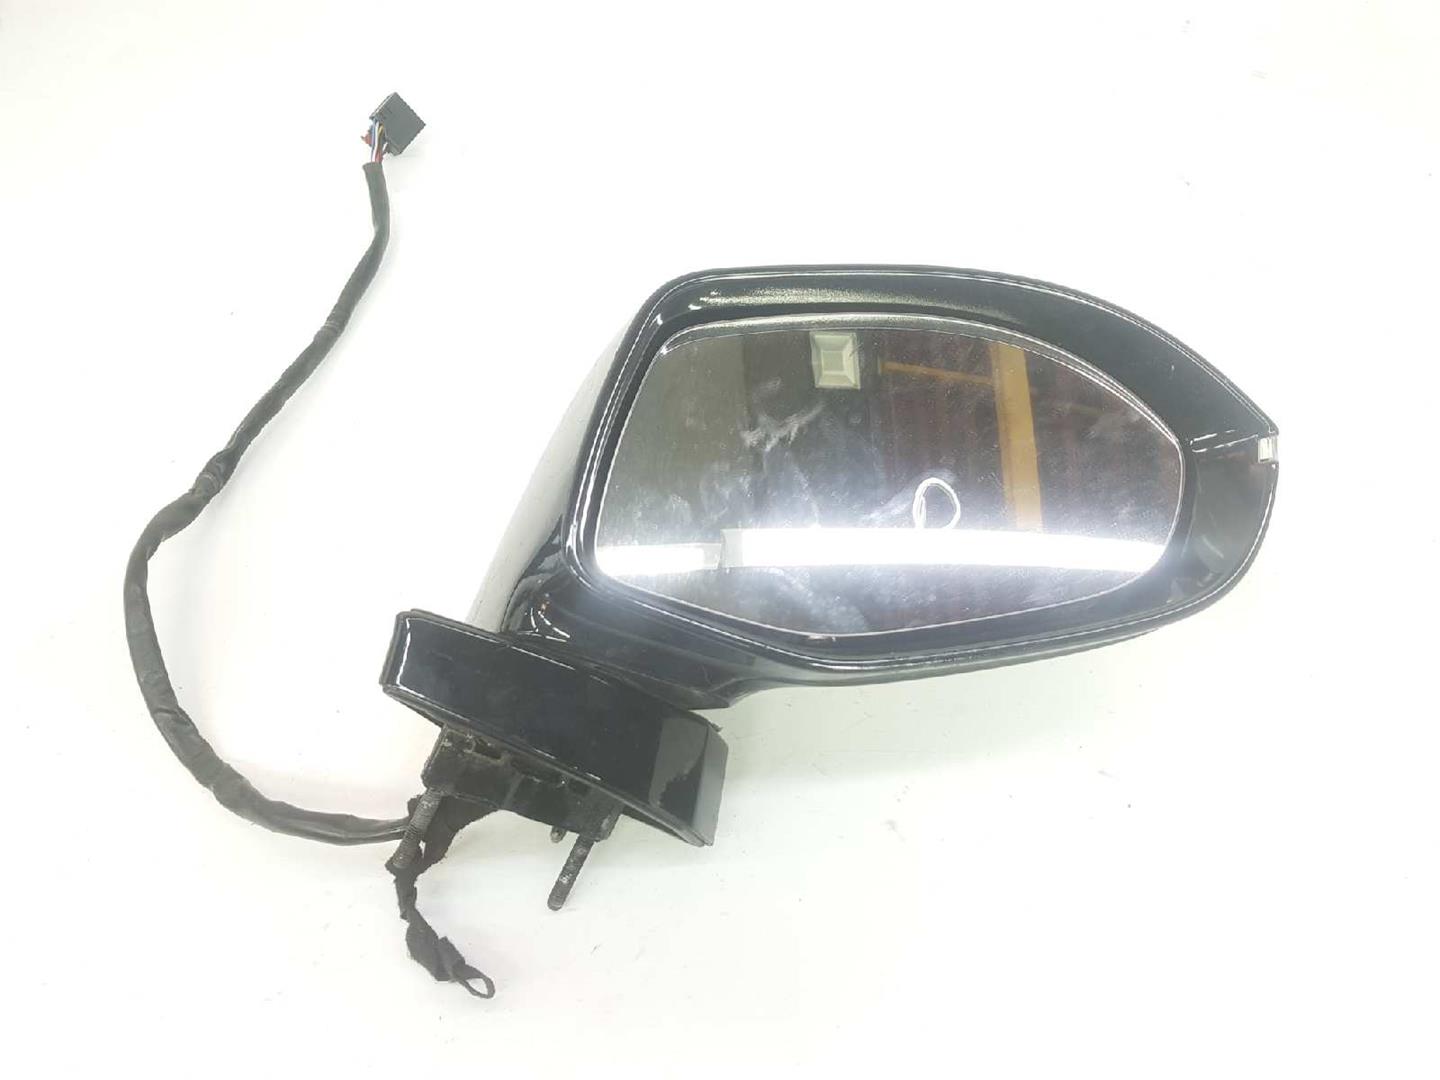 AUDI A7 C7/4G (2010-2020) Right Side Wing Mirror 4G8858532, 4G8858532, COLORGRISOSCURO 19755870